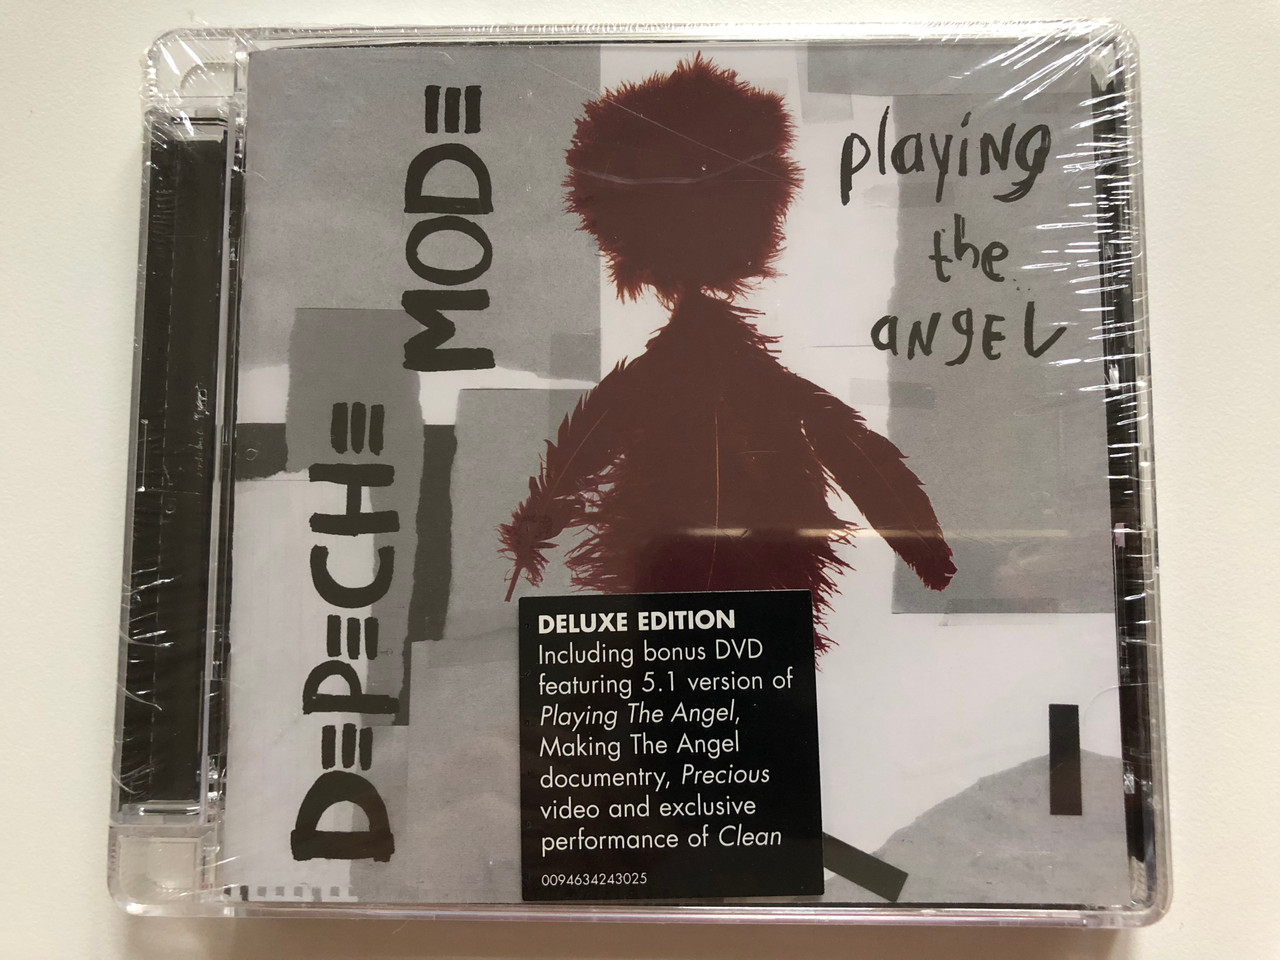 Depeche Mode – Playing The Angel / Deluxe Edition / Including bonus DVD  featuring 5.1 version of Playing The Angel, Making The Angel documentry,  Precious video / Mute Audio CD + DVD CD 2005 / 0094634243025 -  bibleinmylanguage